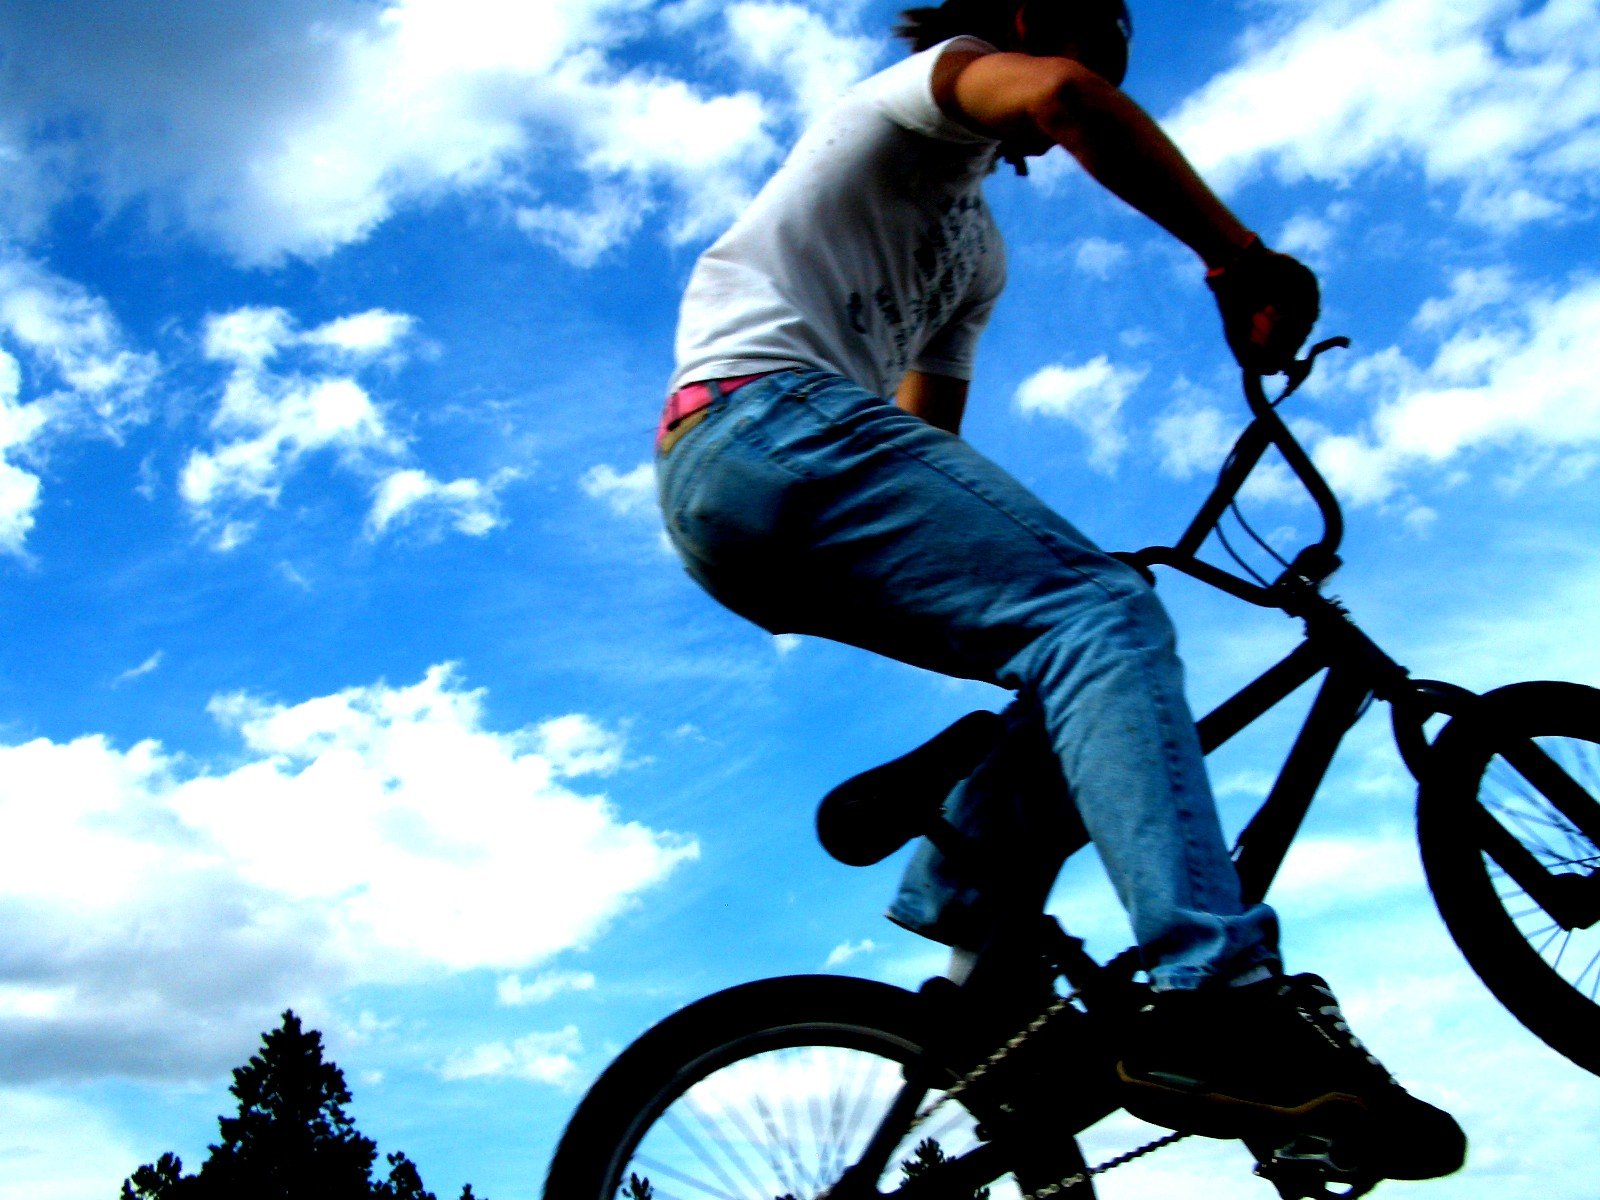 a person riding a bike doing tricks in the sky